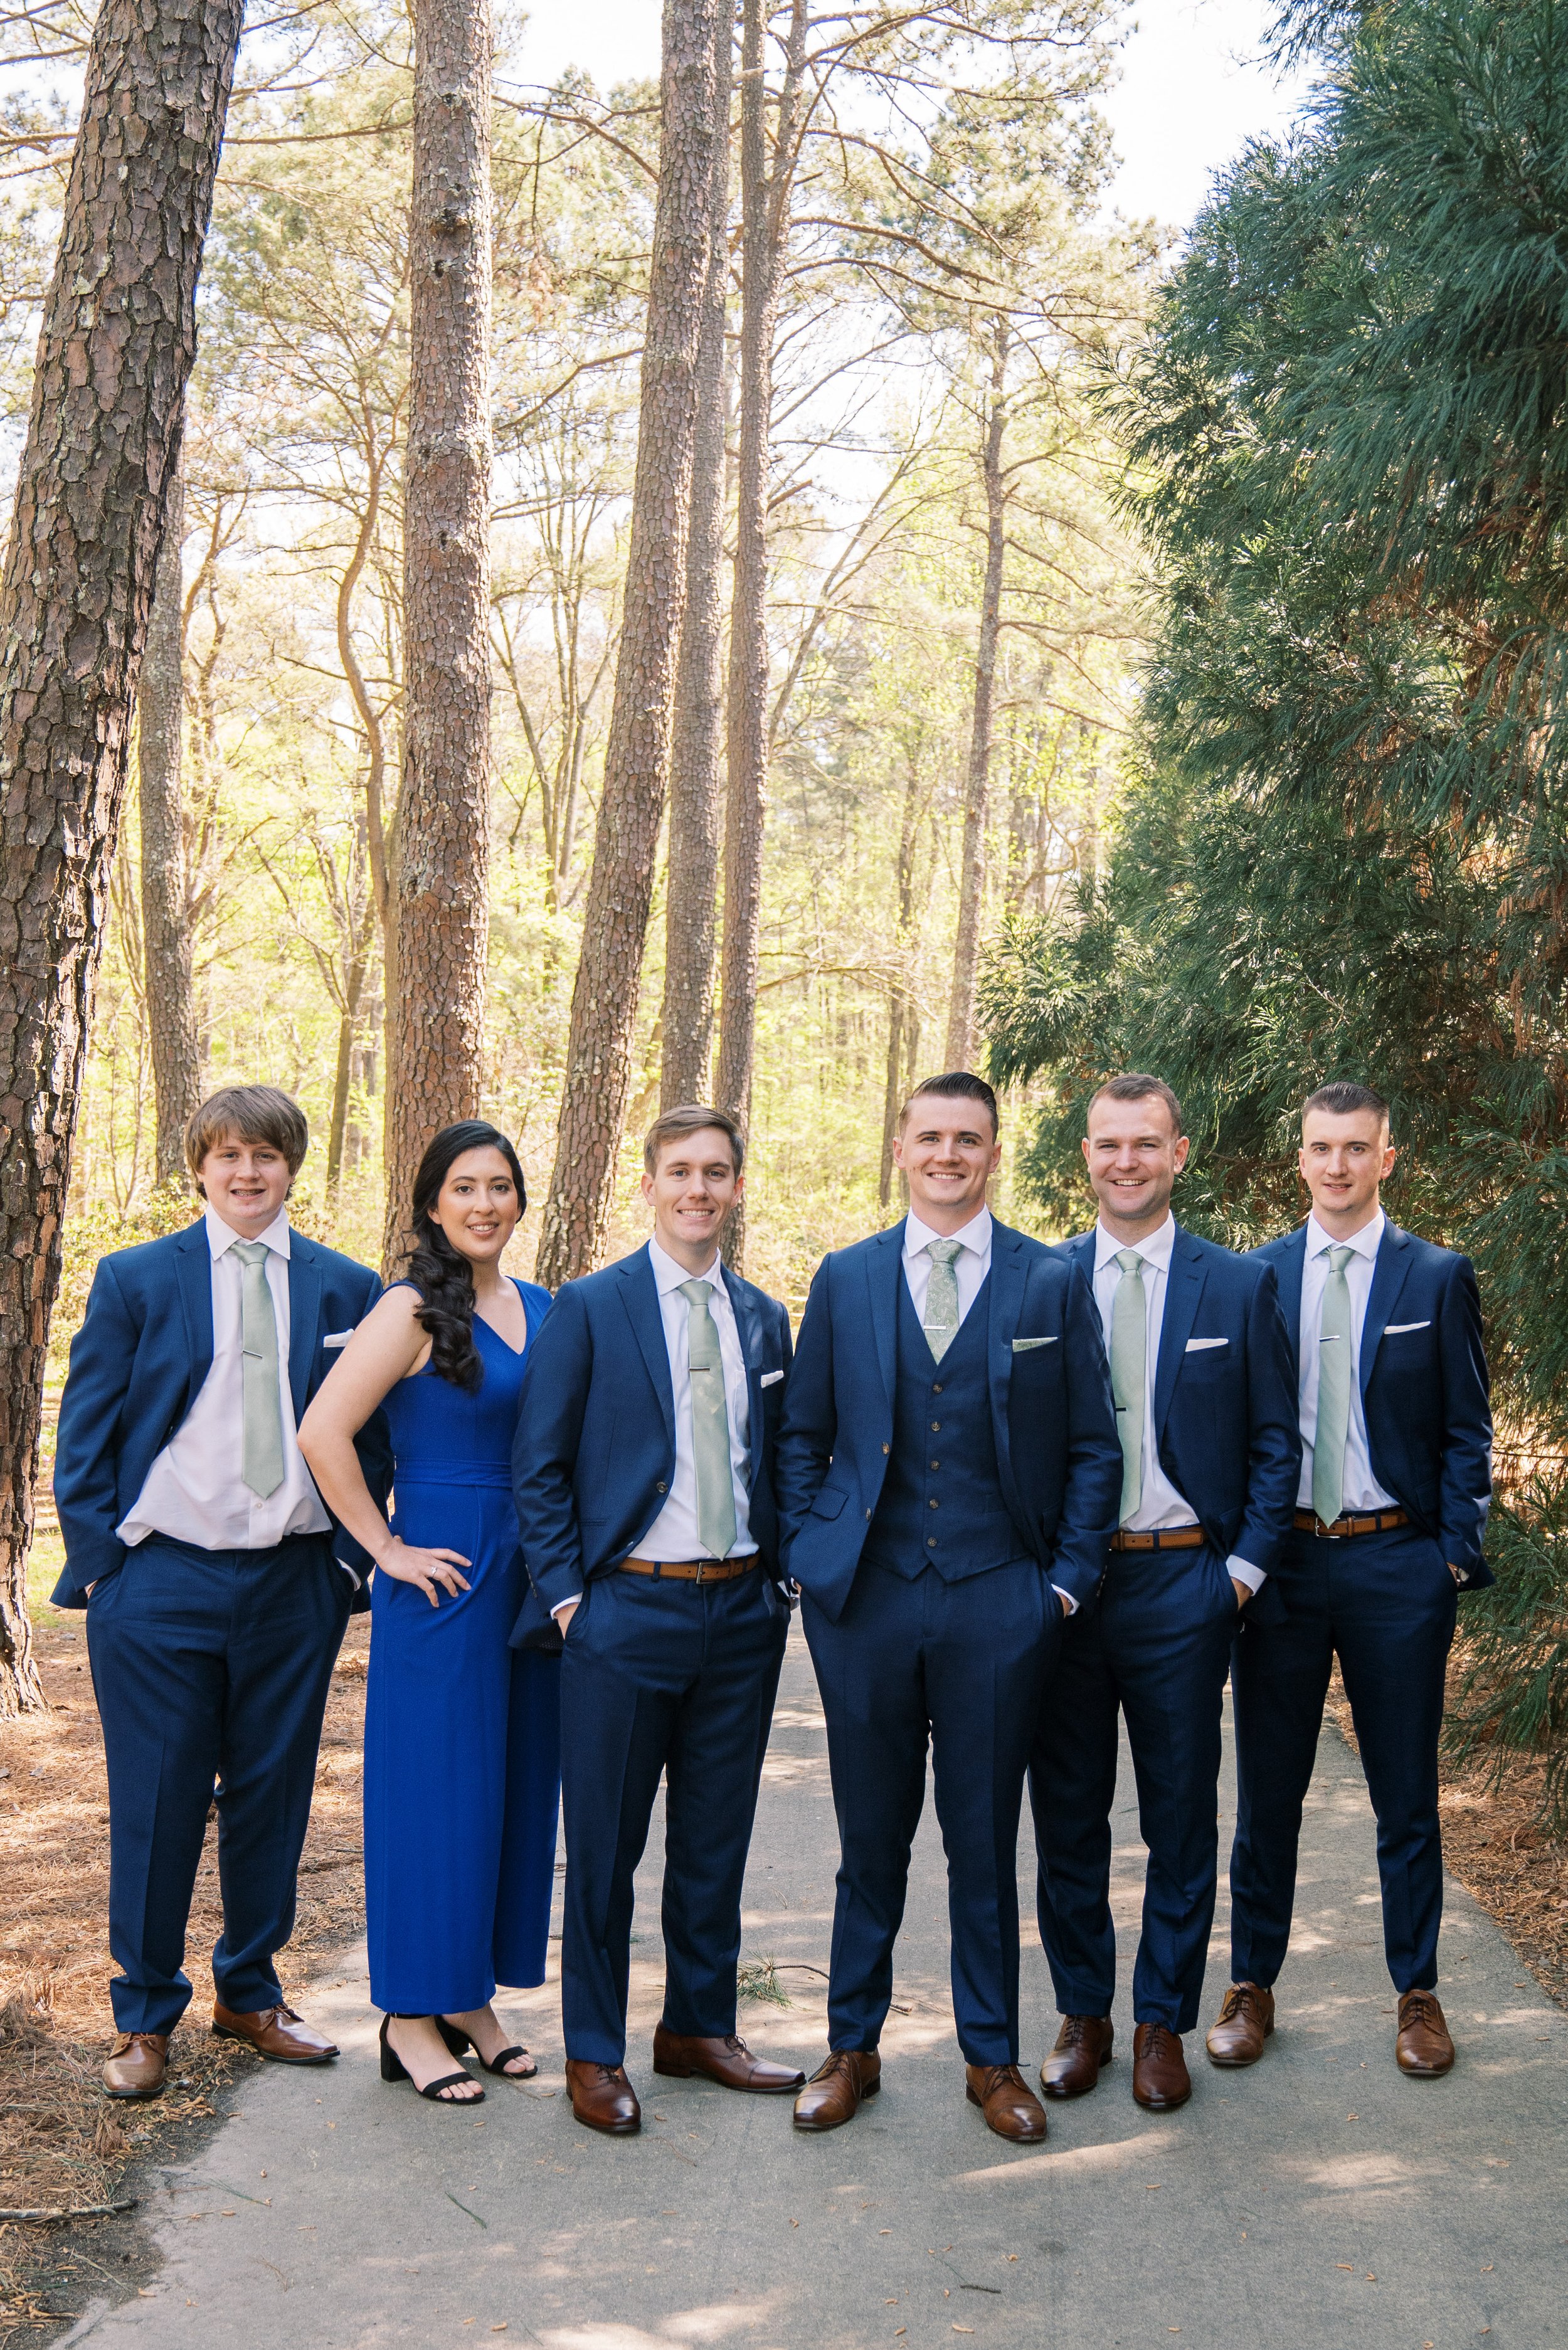 Good Looking Groom and Party Cape Fear Botanical Garden Wedding Fancy This Photography